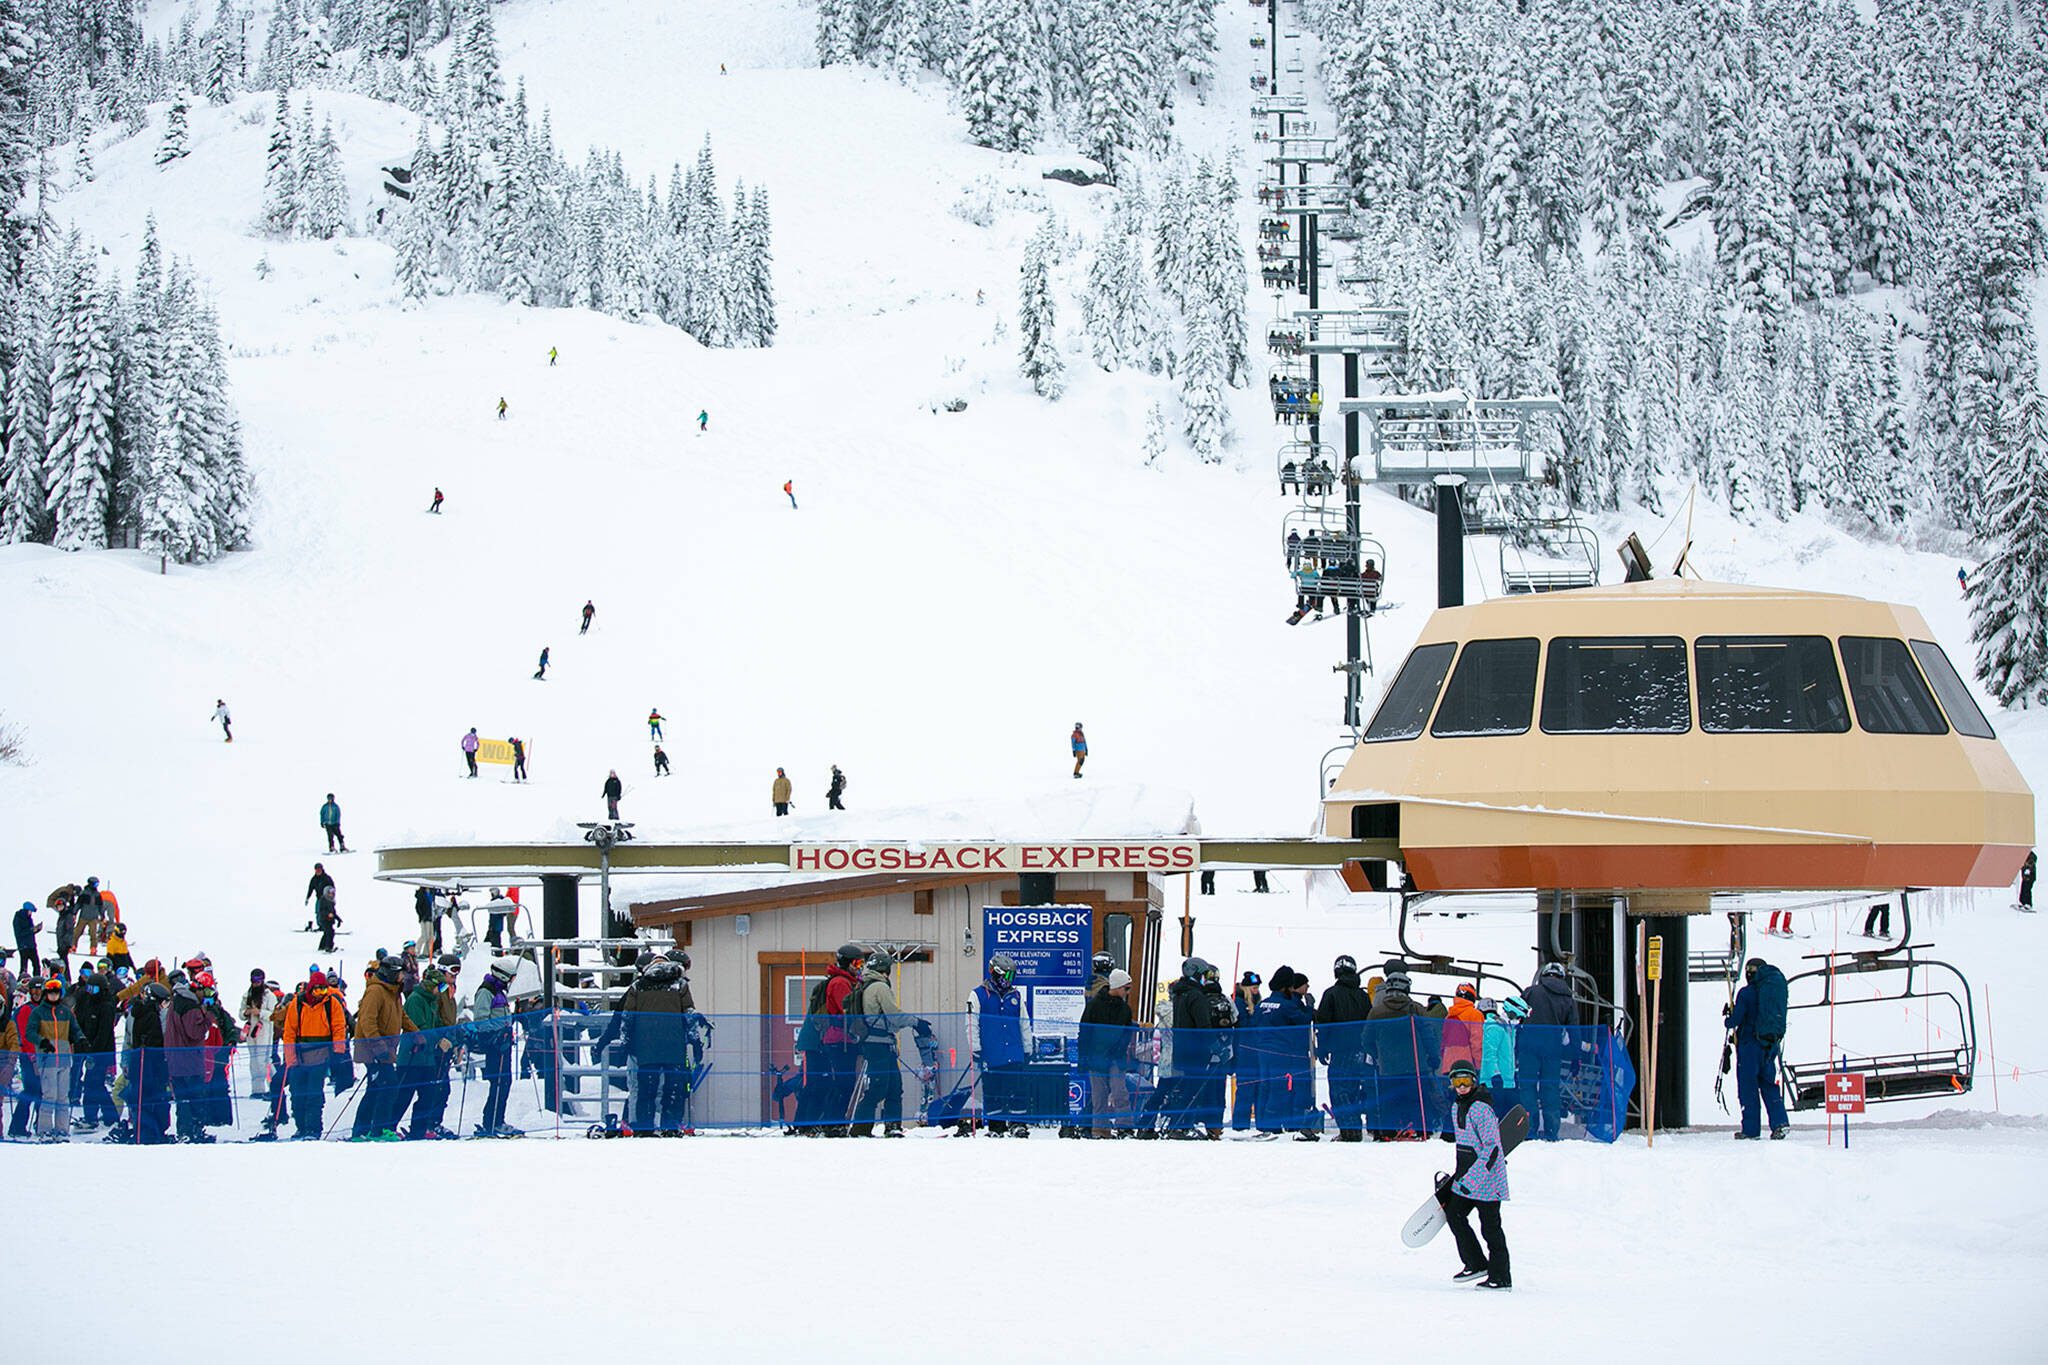 The line for a lift grows steadily as more people arrive throughout the day on the opening day of ski season at Stevens Pass Ski Area on Friday, Dec. 2, 2022, near Skykomish, Washington. (Ryan Berry / The Herald)